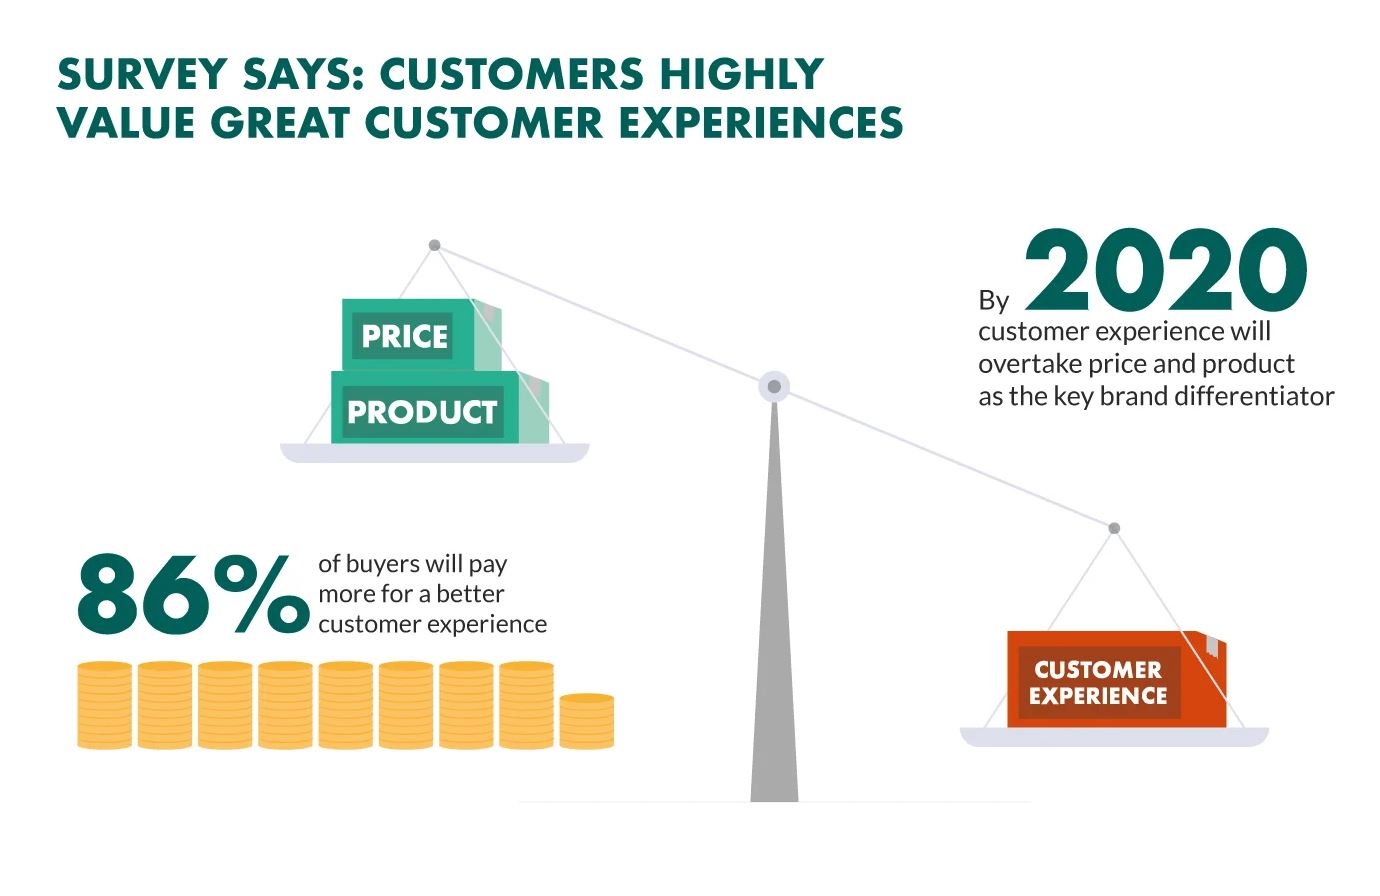 86% of buyers prefer great customer experience